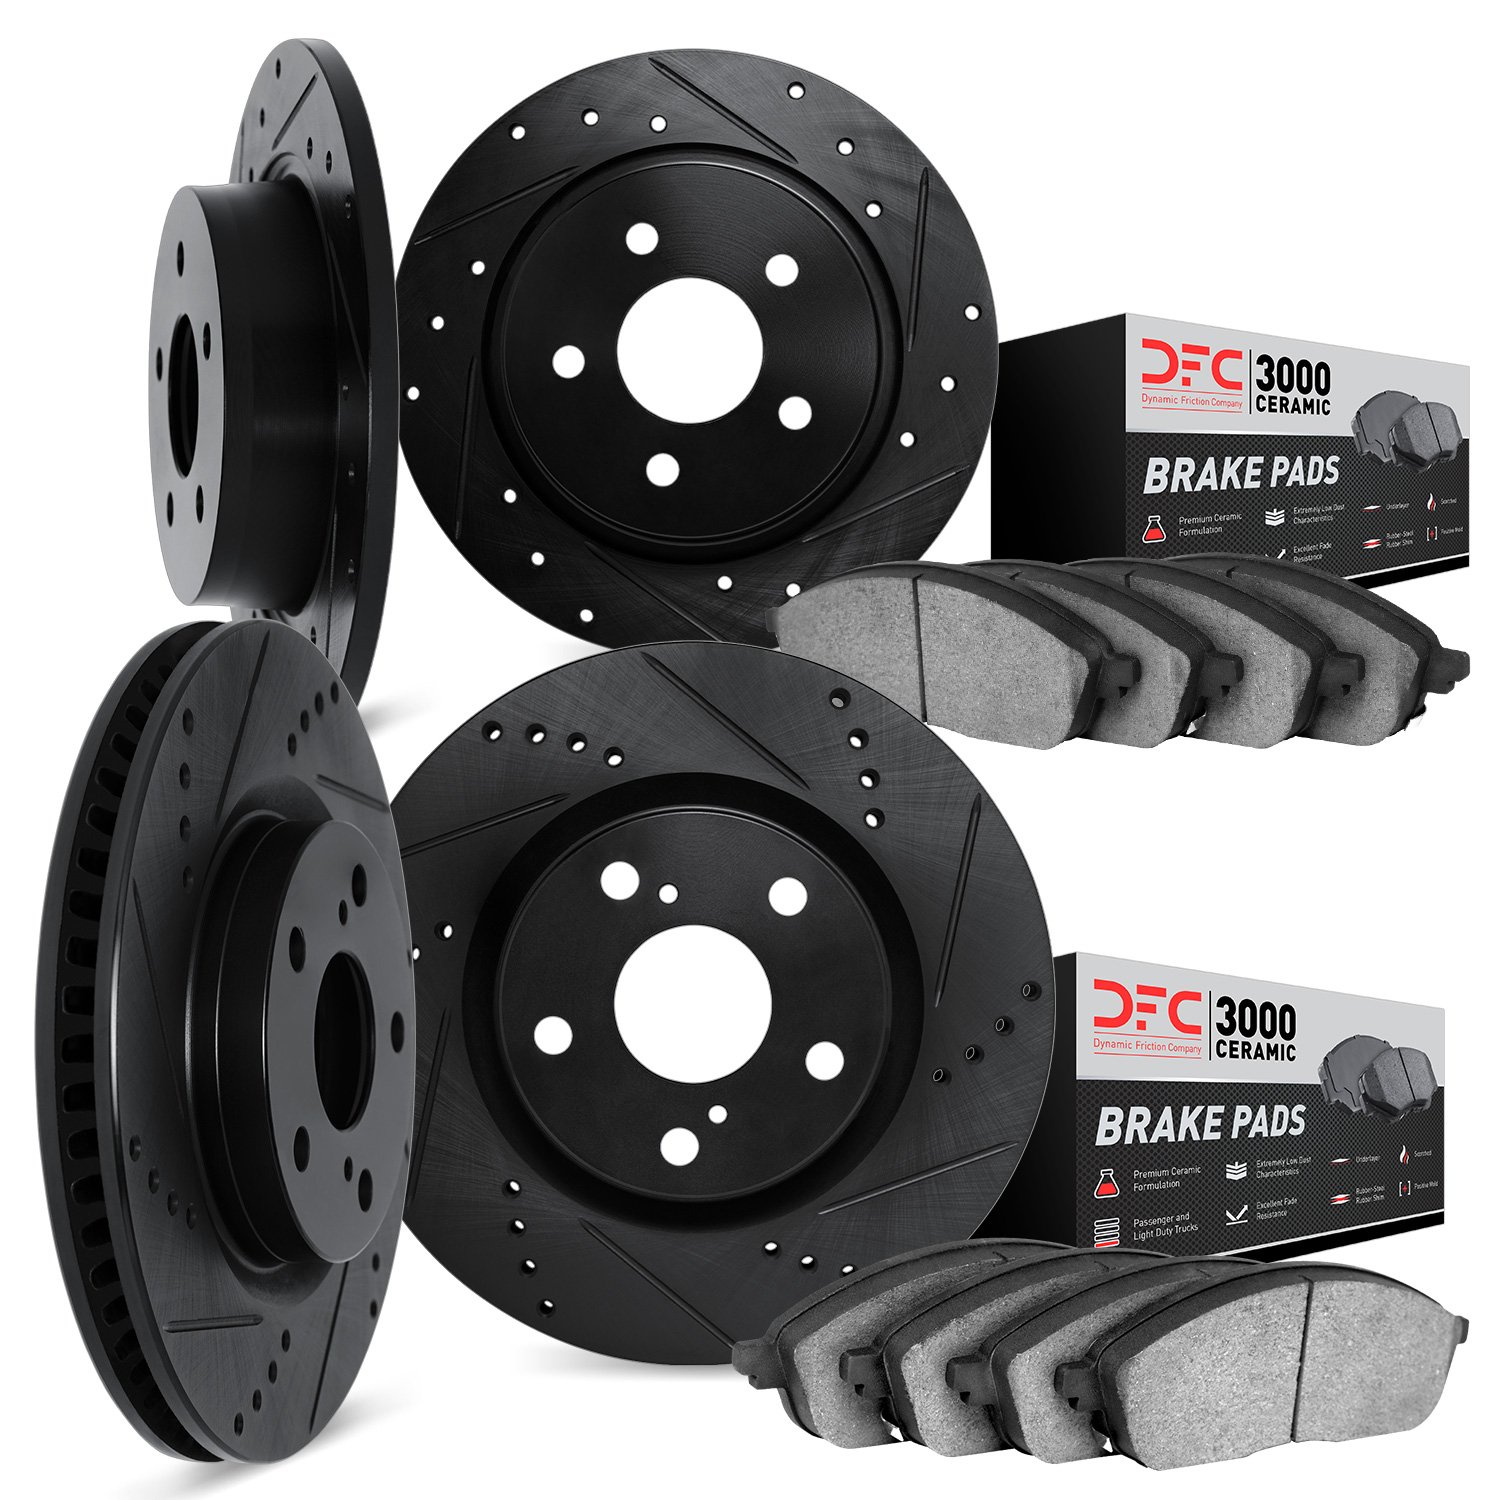 8304-40004 Drilled/Slotted Brake Rotors with 3000-Series Ceramic Brake Pads Kit [Black], 1989-1990 Mopar, Position: Front and Re